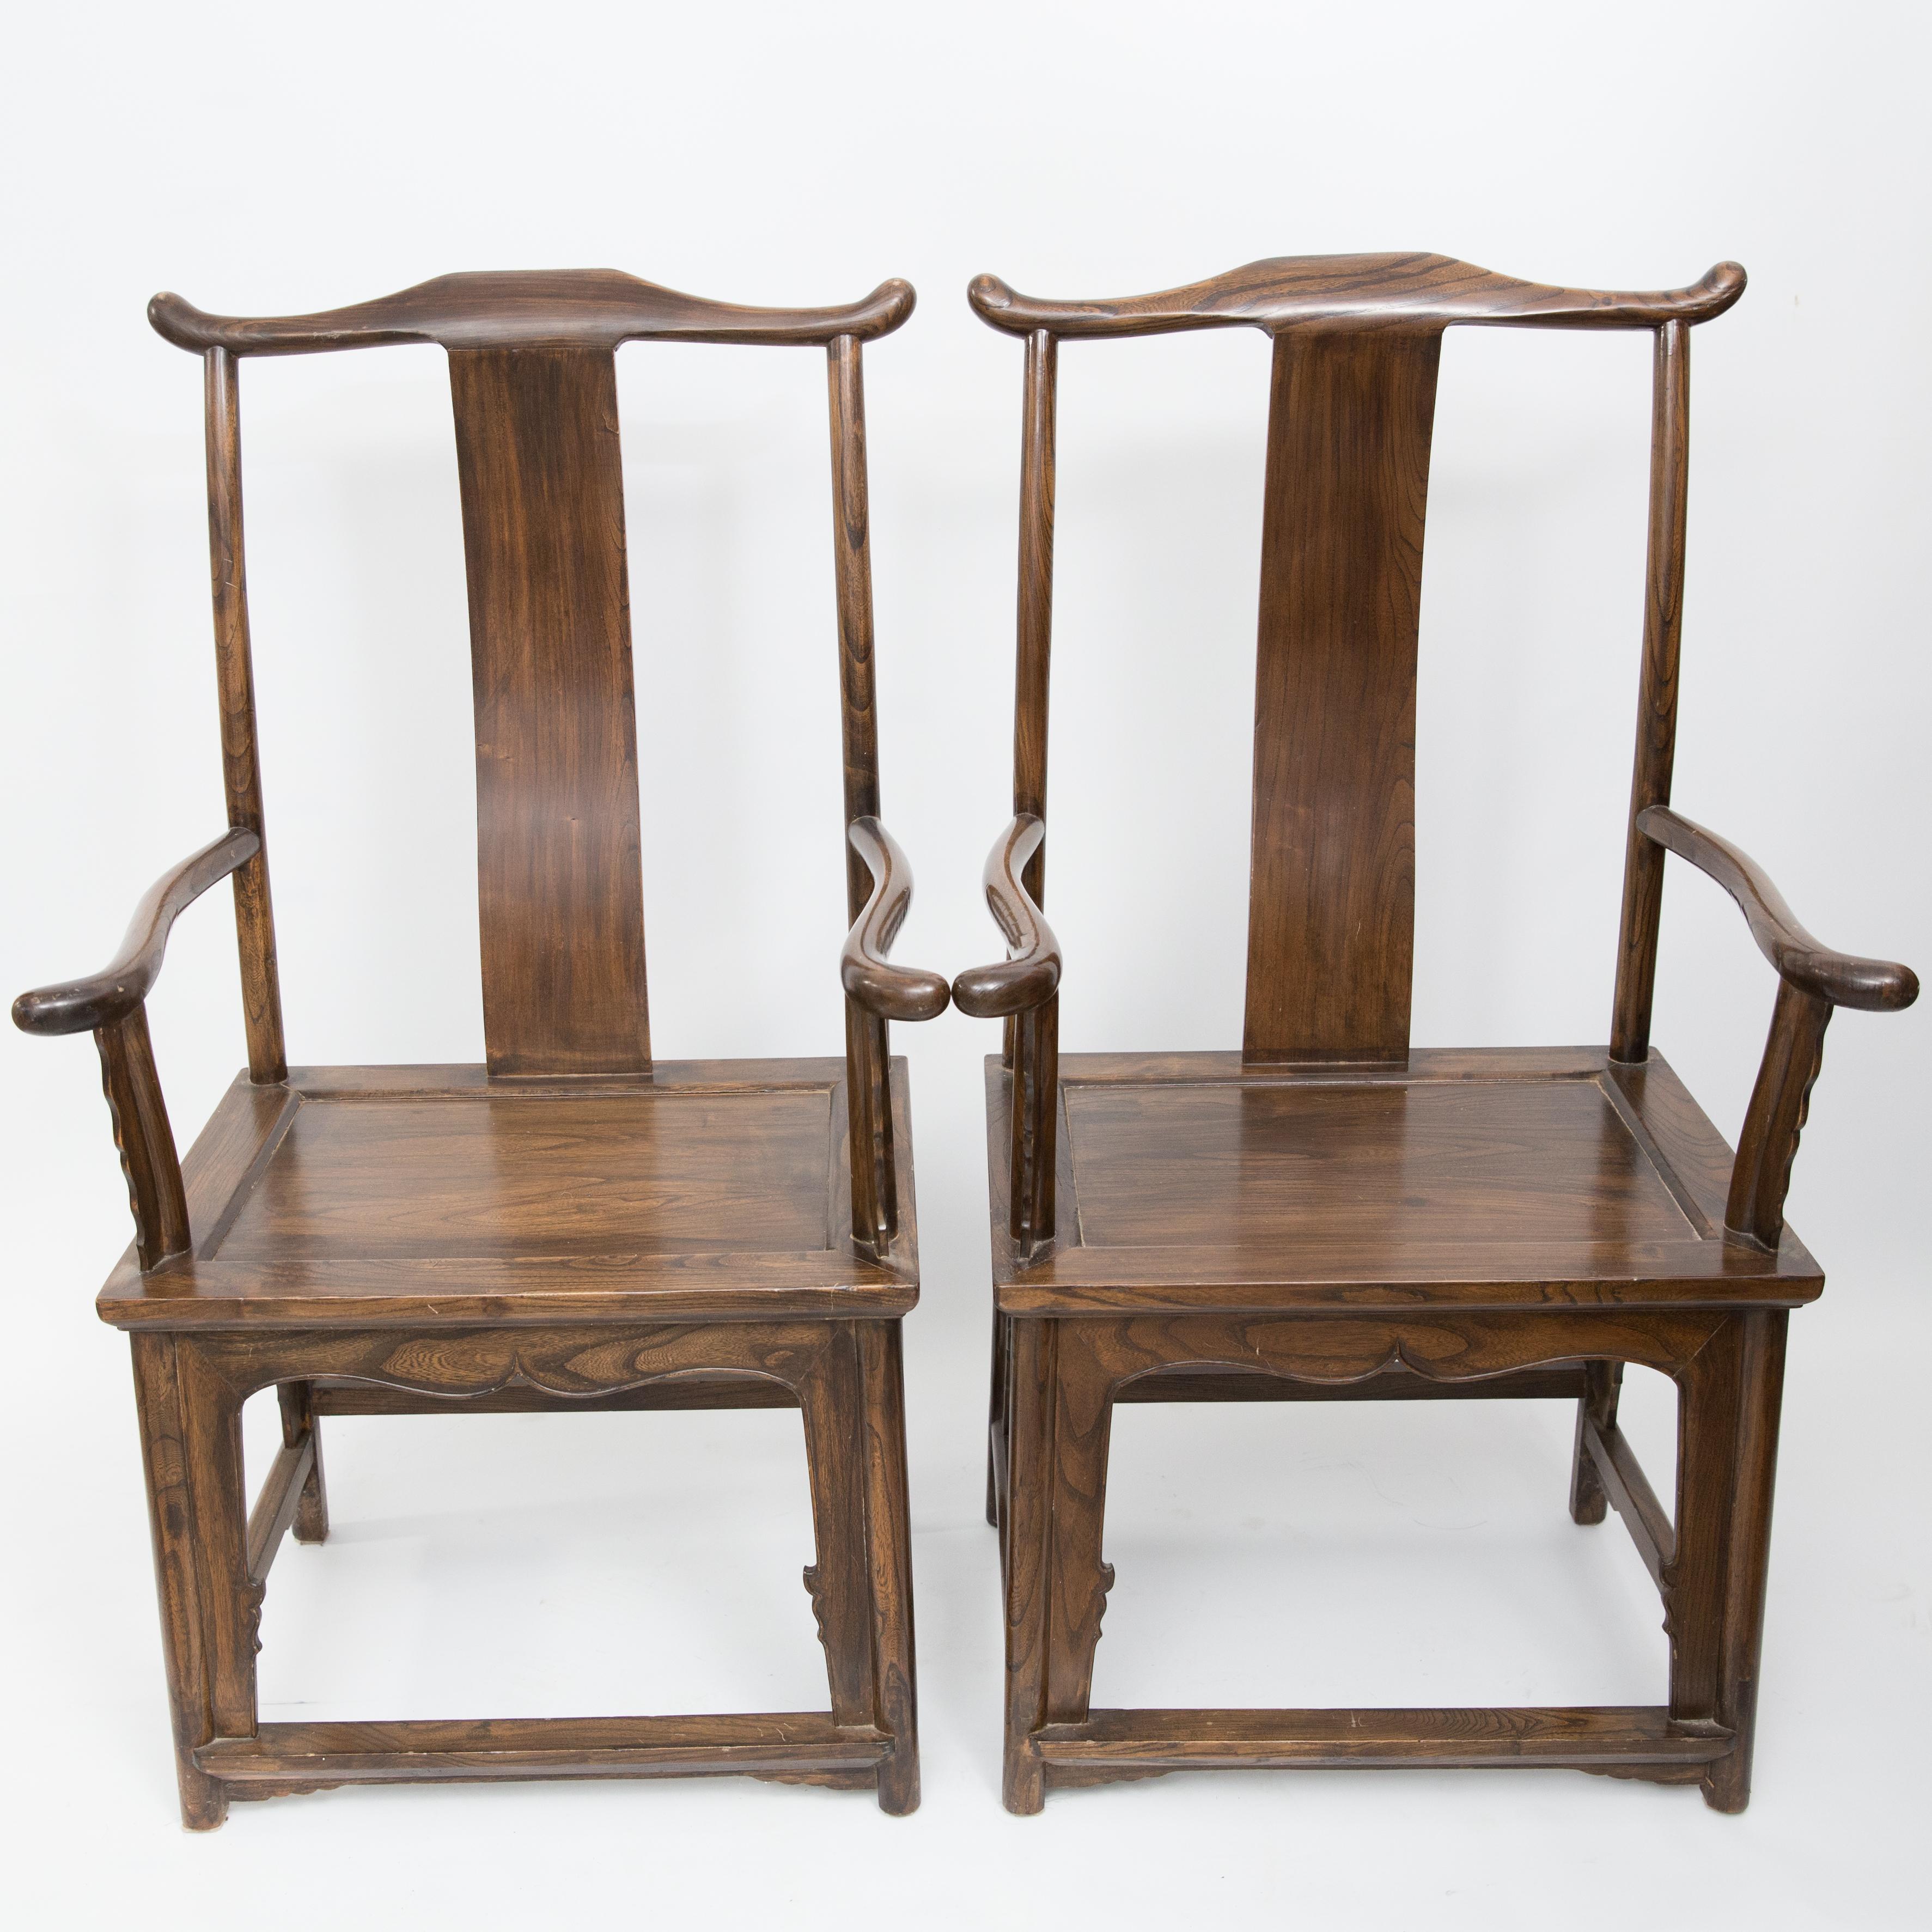 Offered is a graceful pair of yolk high back exotic wood Chinese antique arm chairs in the Classic Ming design. The chairs could be used as side chairs or dining chairs. There is no structural damages on the chairs and they are structurally sound